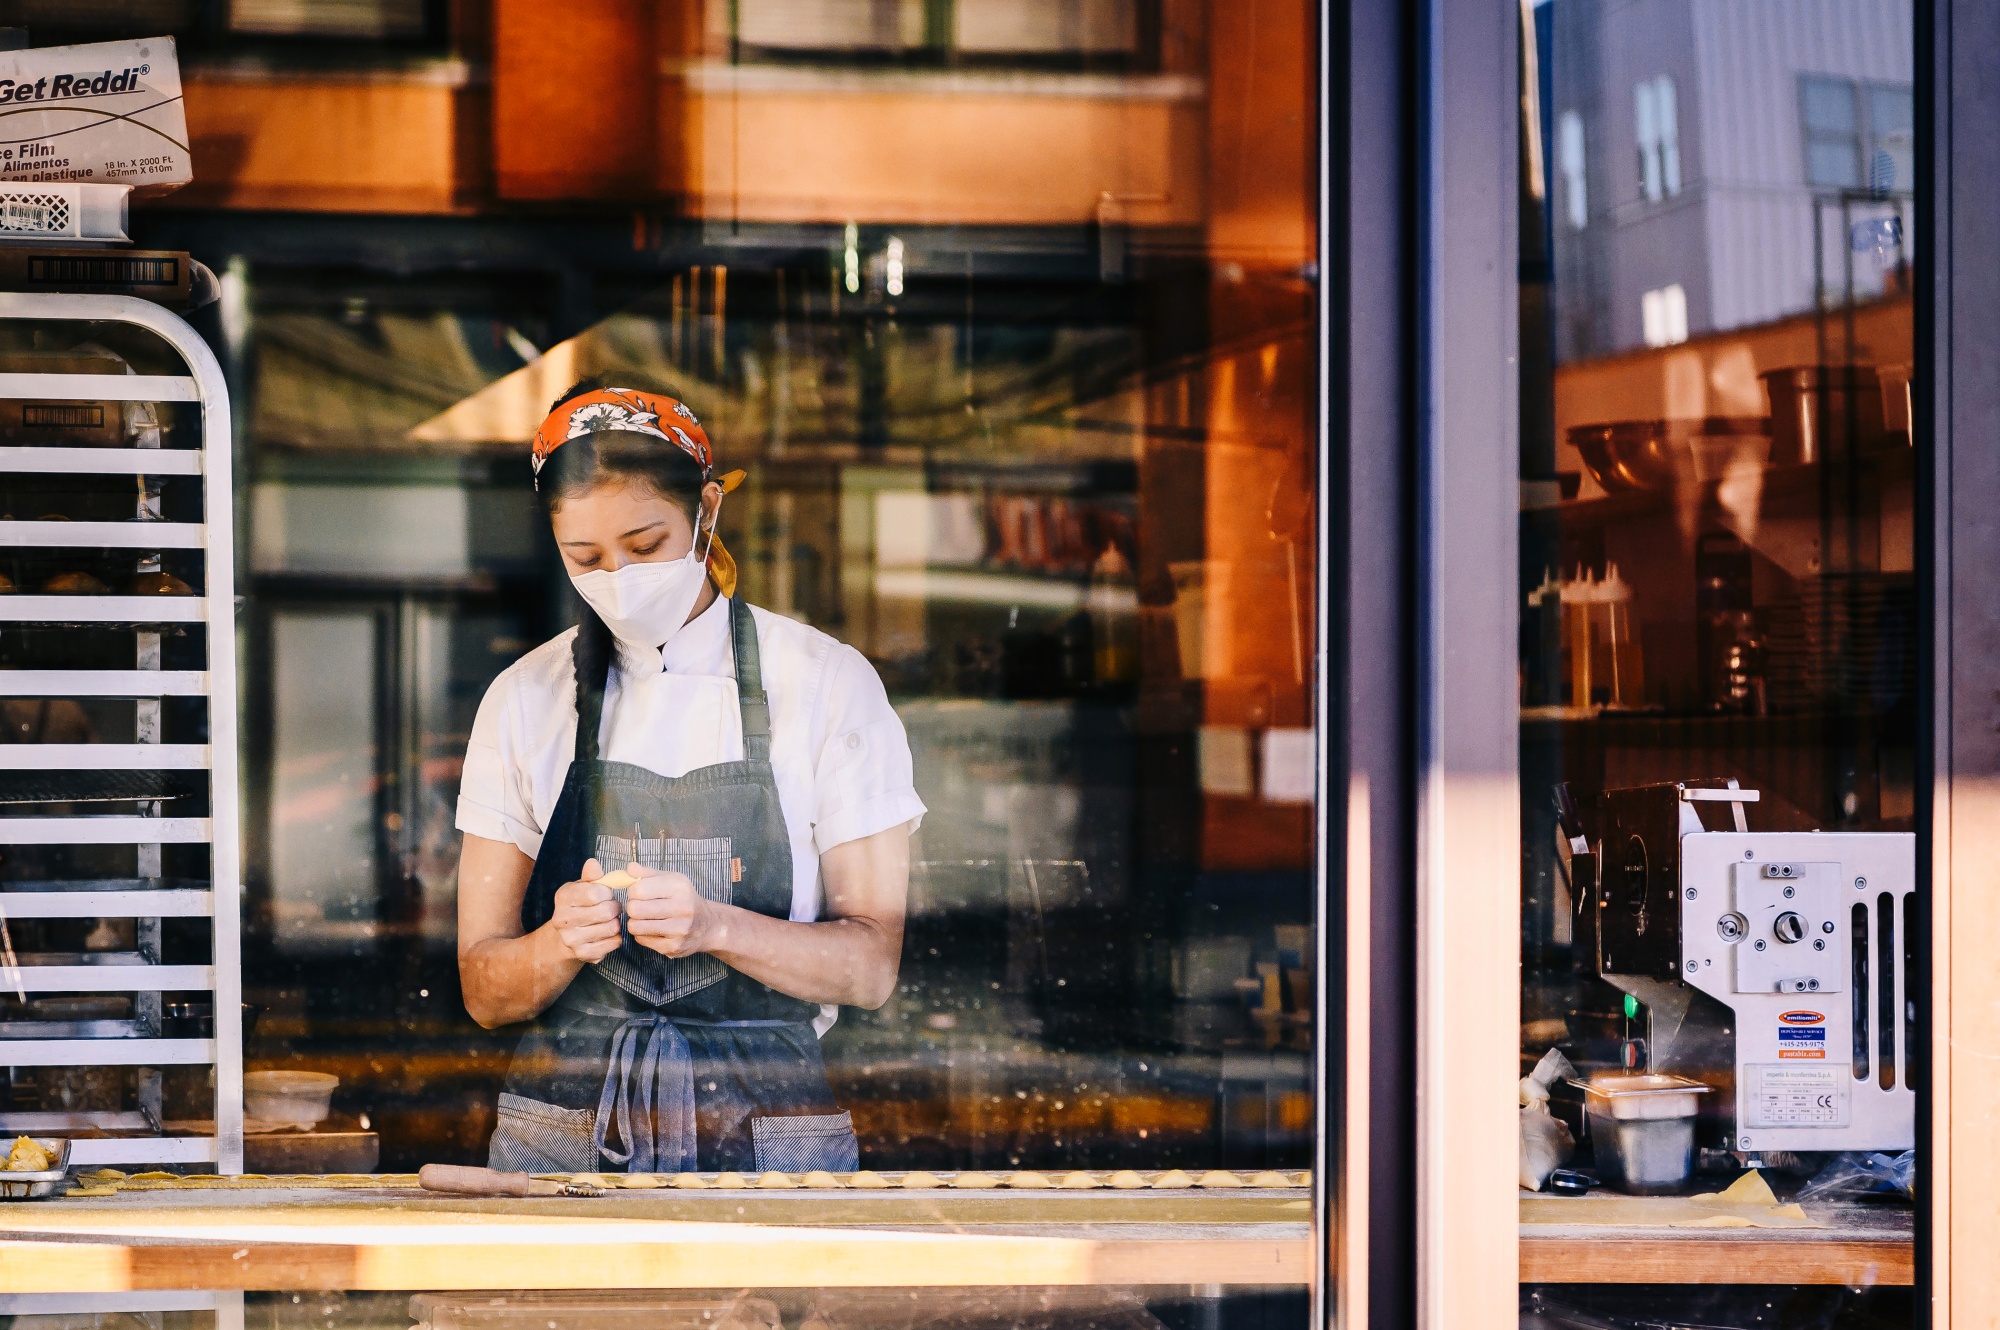 A worker wears a protective mask while preparing food at a restaurant in Memphis, Tennessee.